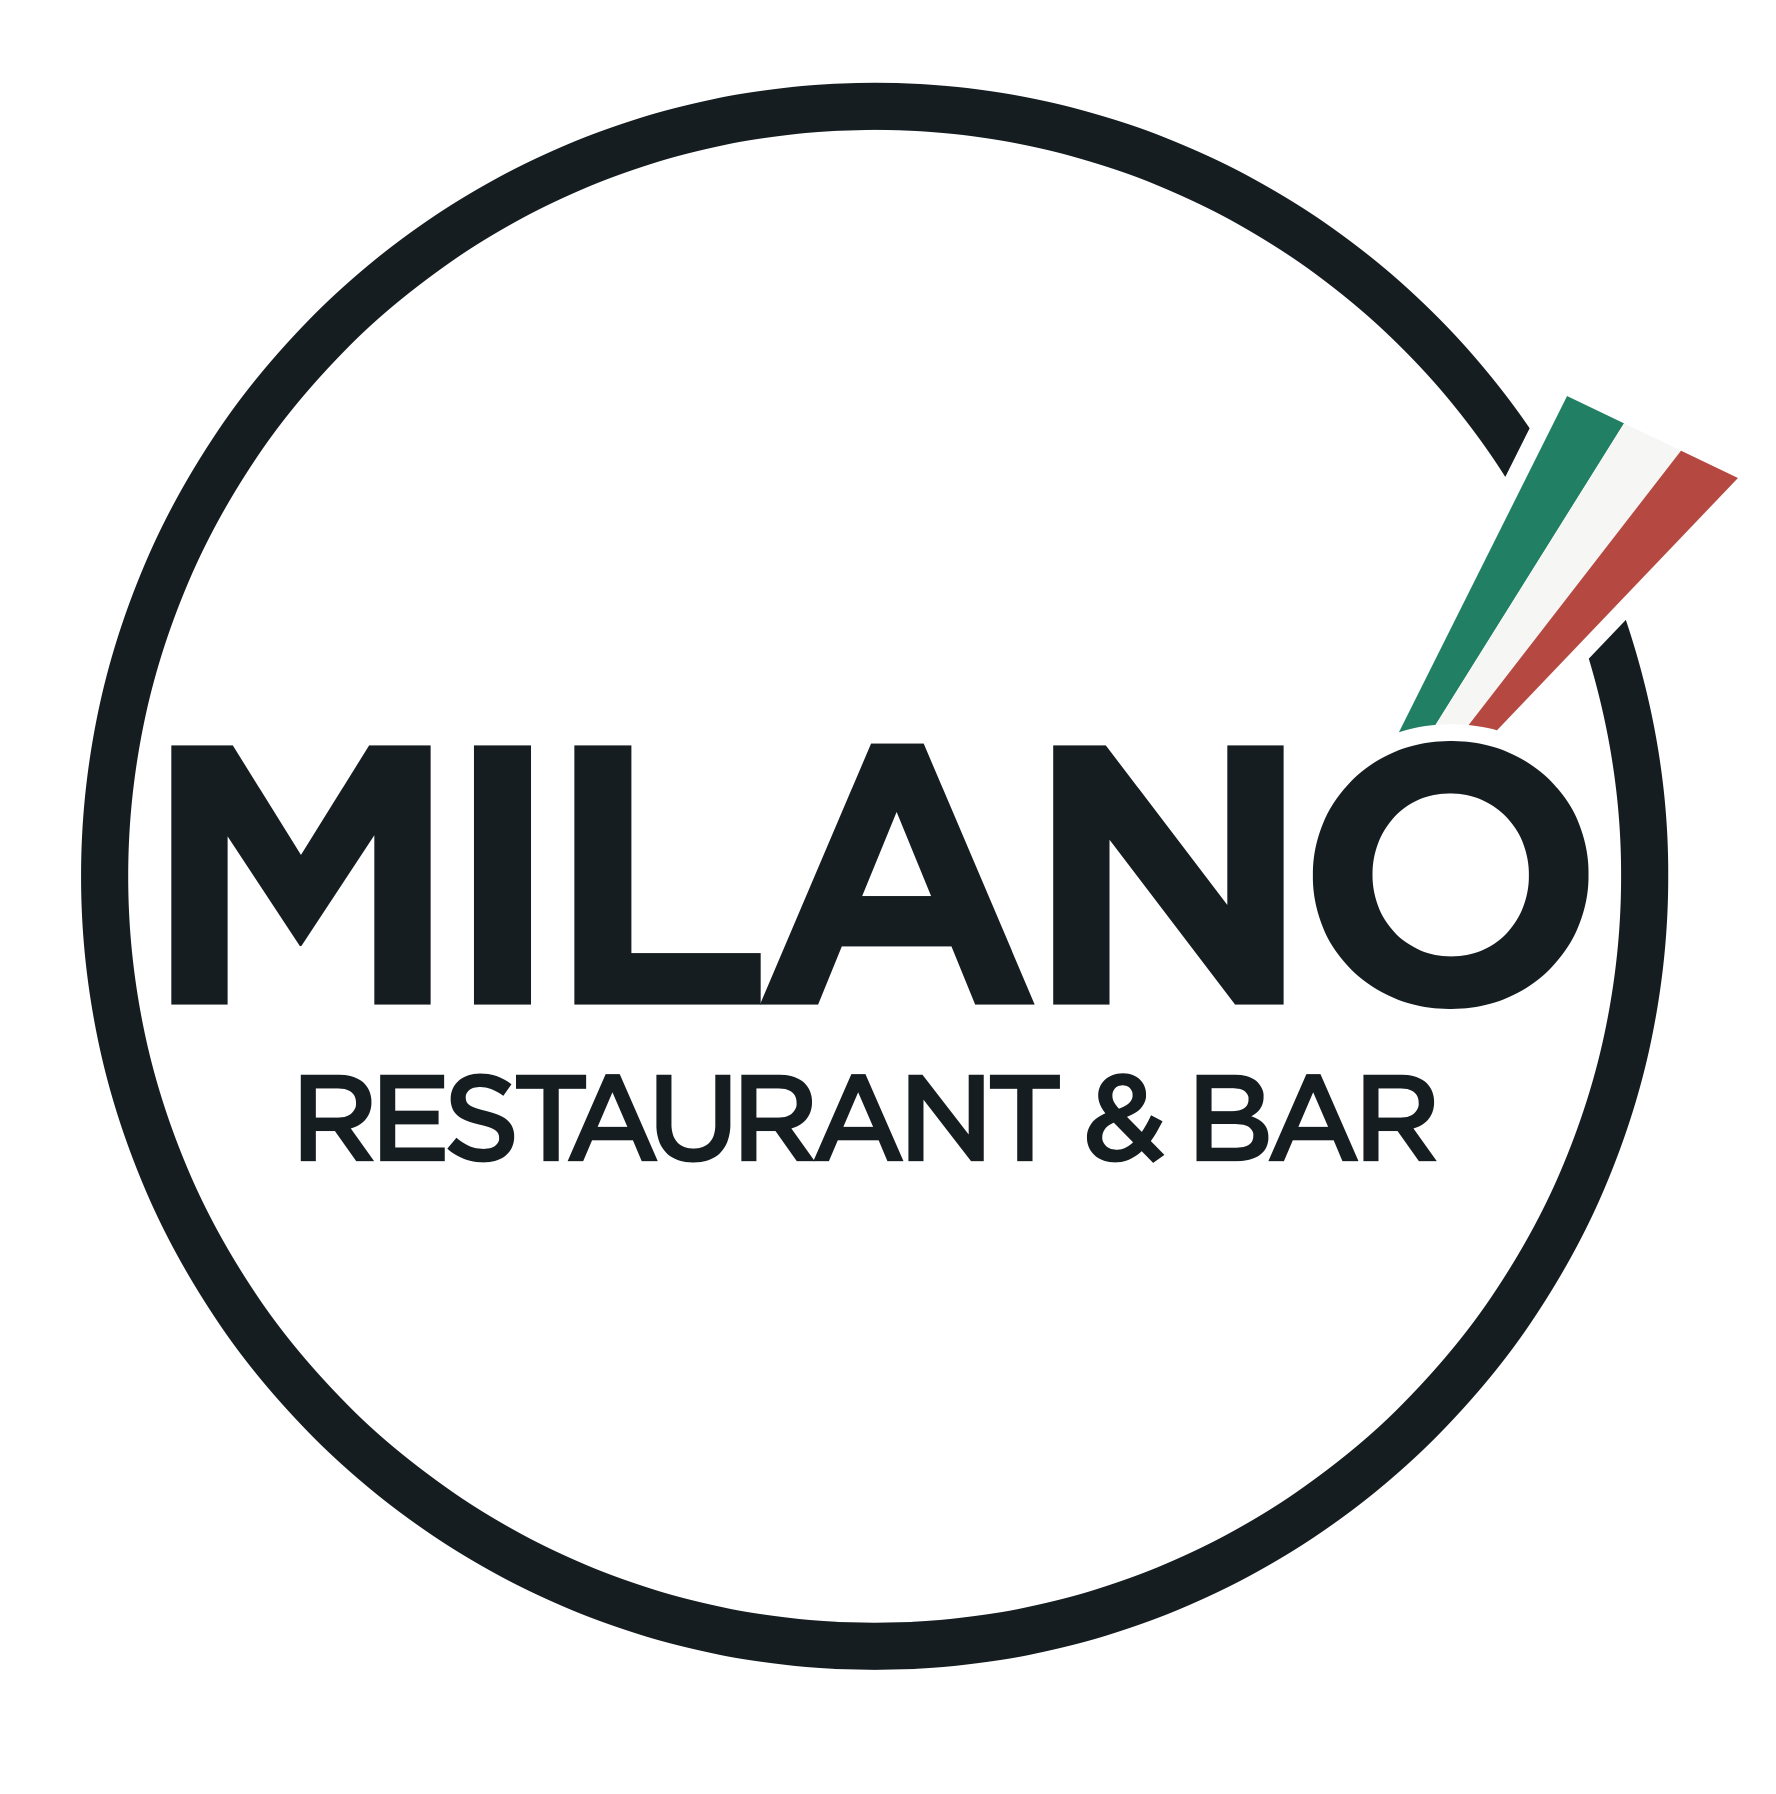 Milano Restaurant & Bar in Town Square Las Vegas Authentic Italian Food  Come try our signature dishes enjoying the view from our beautiful patio, By Milano Restaurant & Bar